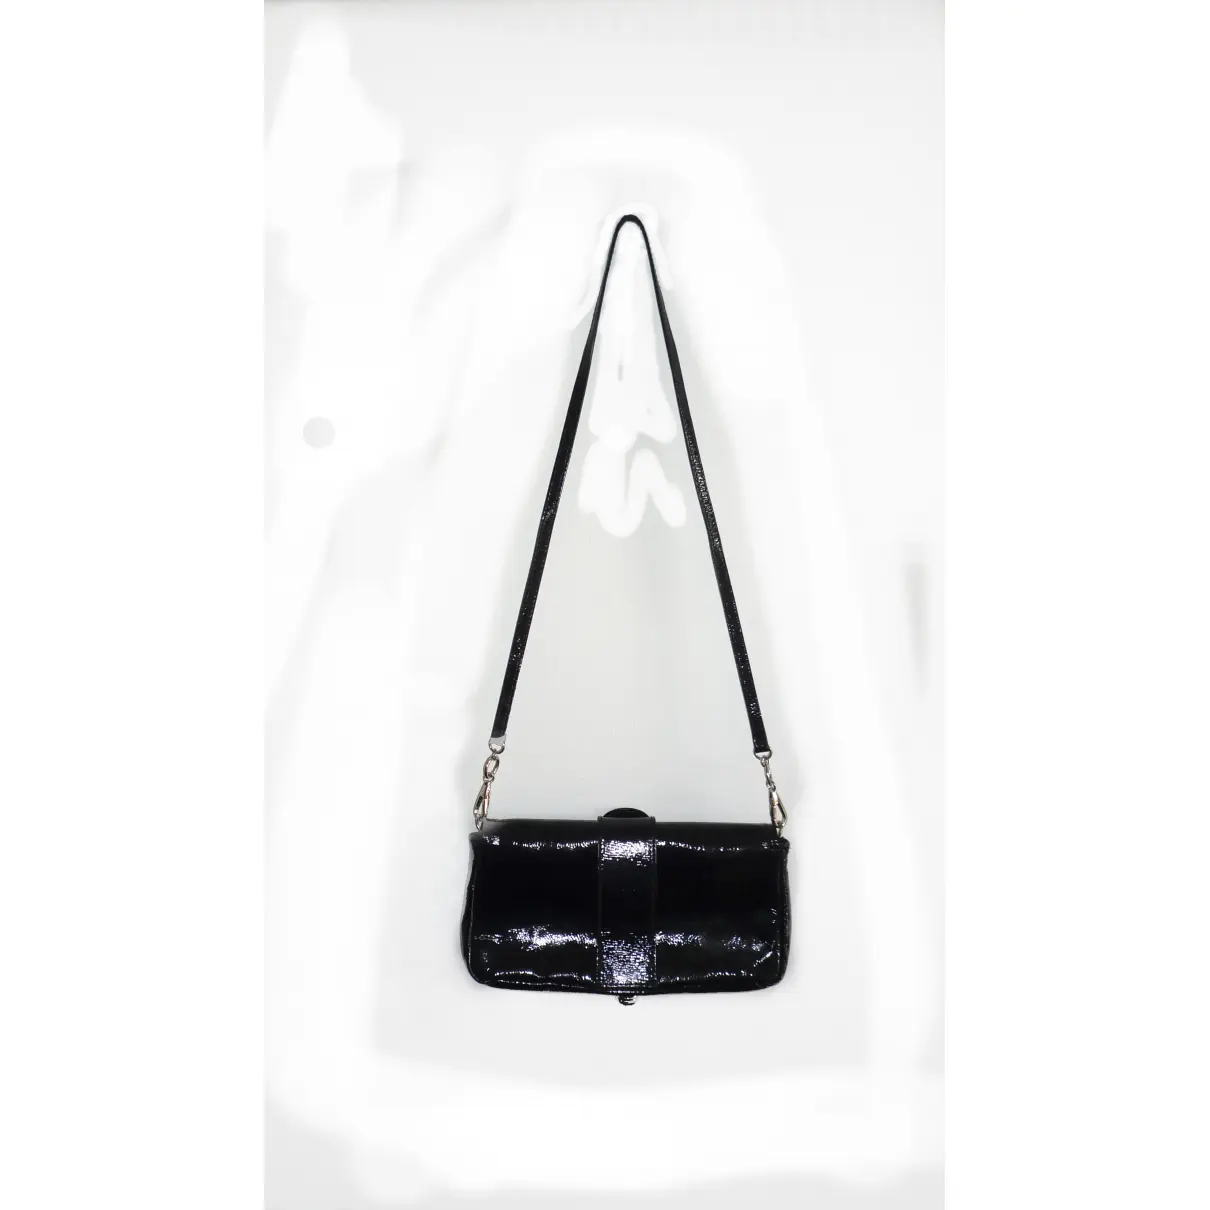 Buy Givenchy Patent leather clutch bag online - Vintage